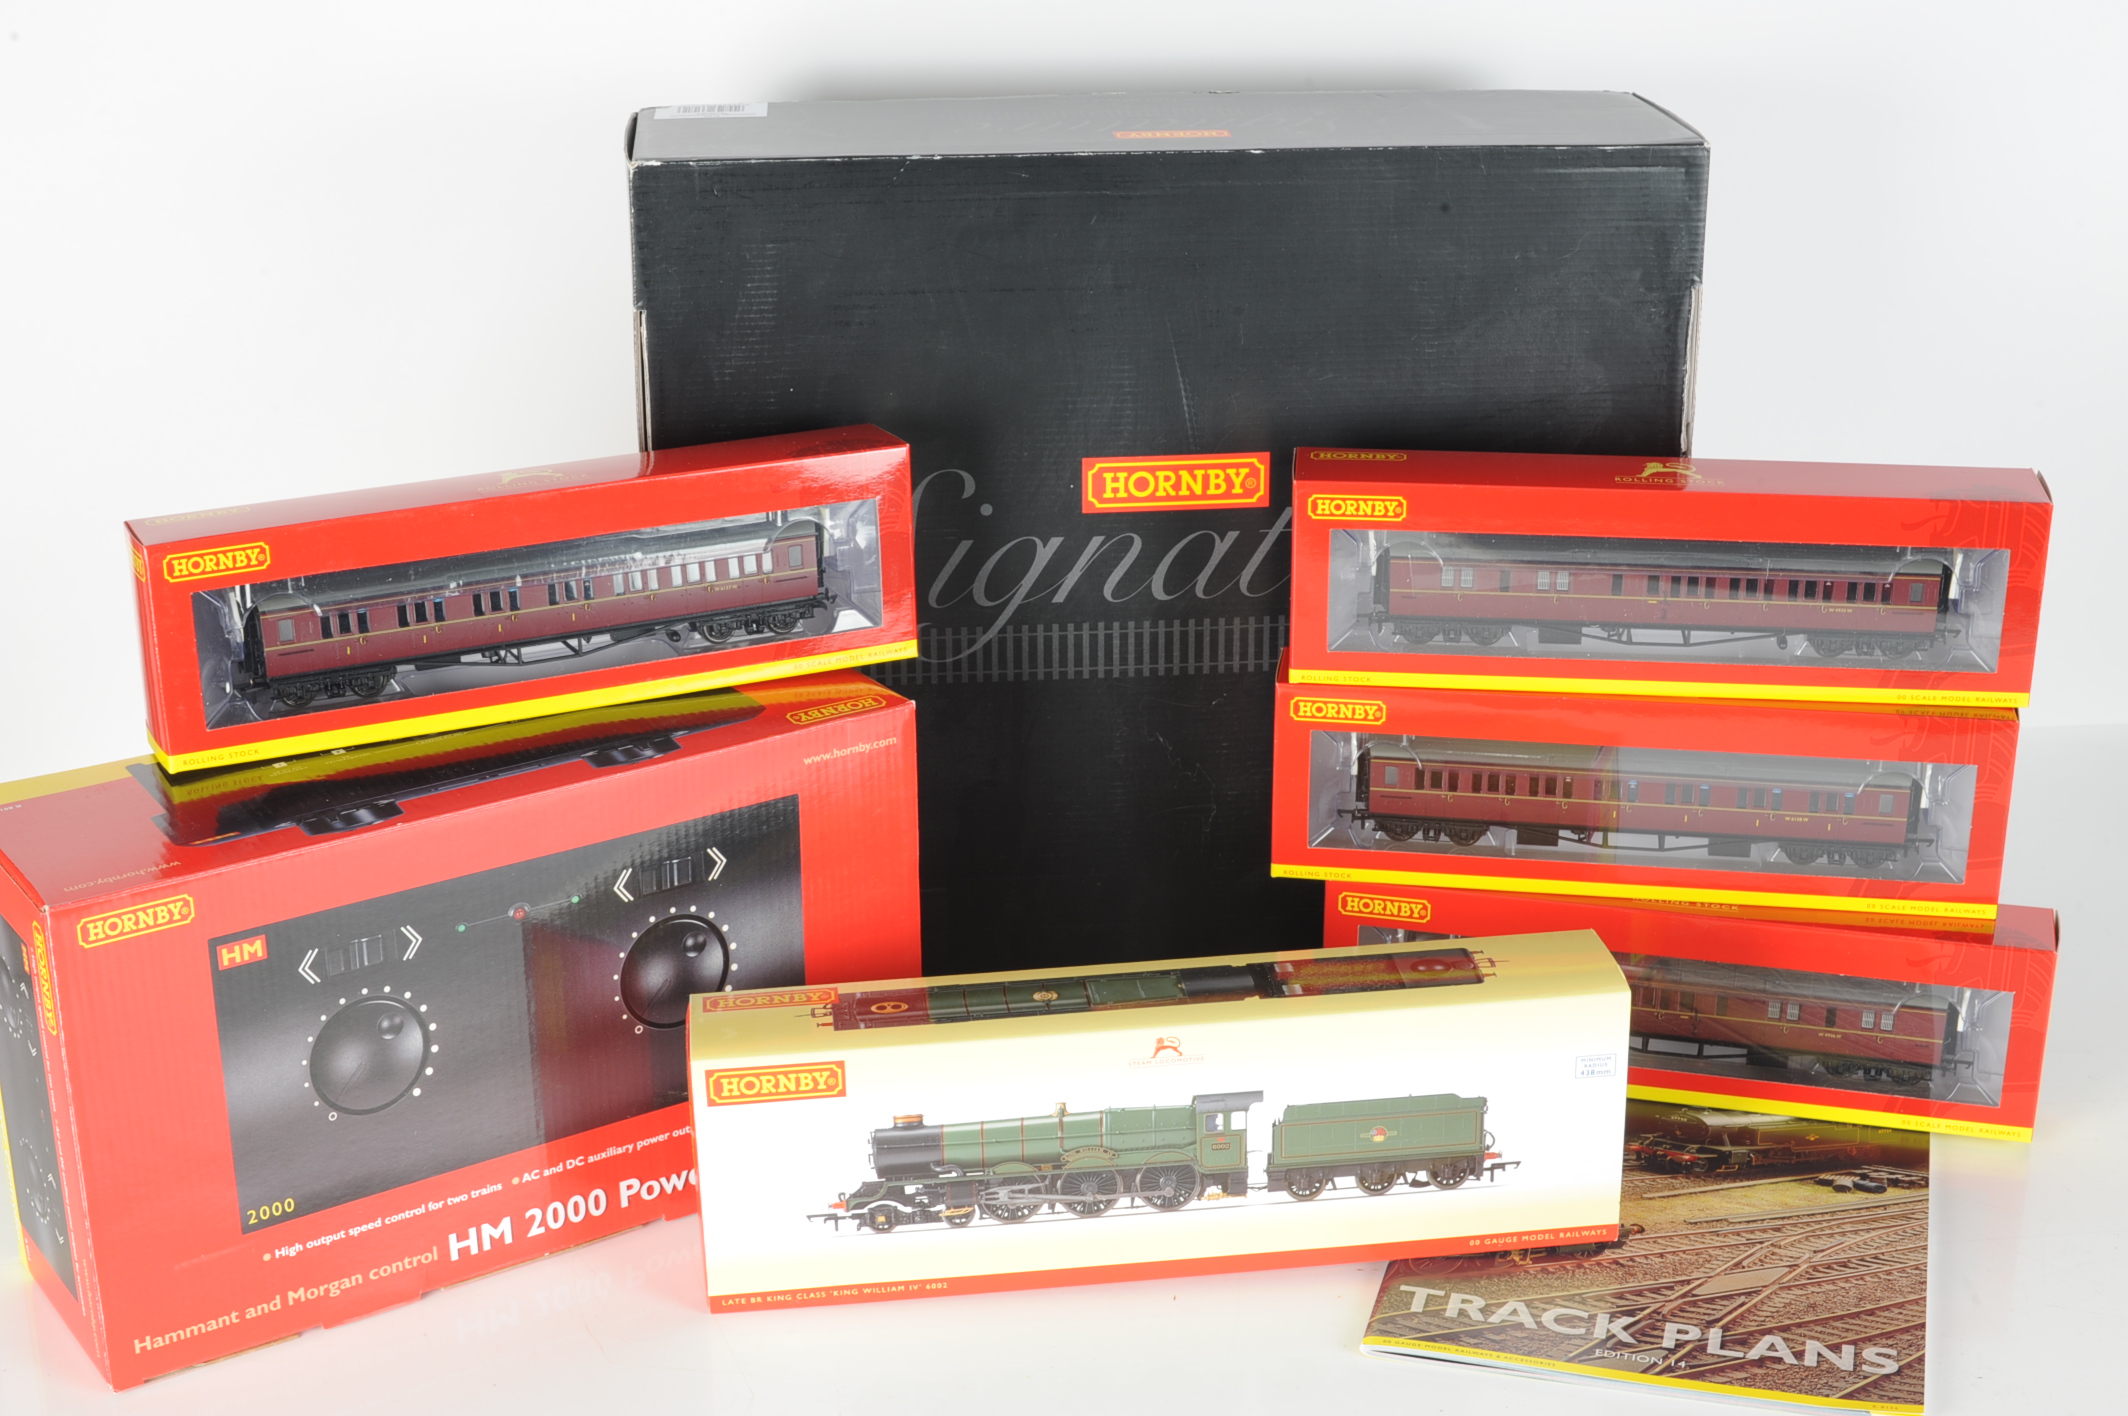 Hatton's for Hornby 00 Gauge R1243 Signature The Welshman Train Set, comprising R3409 BR green 'King - Image 2 of 2